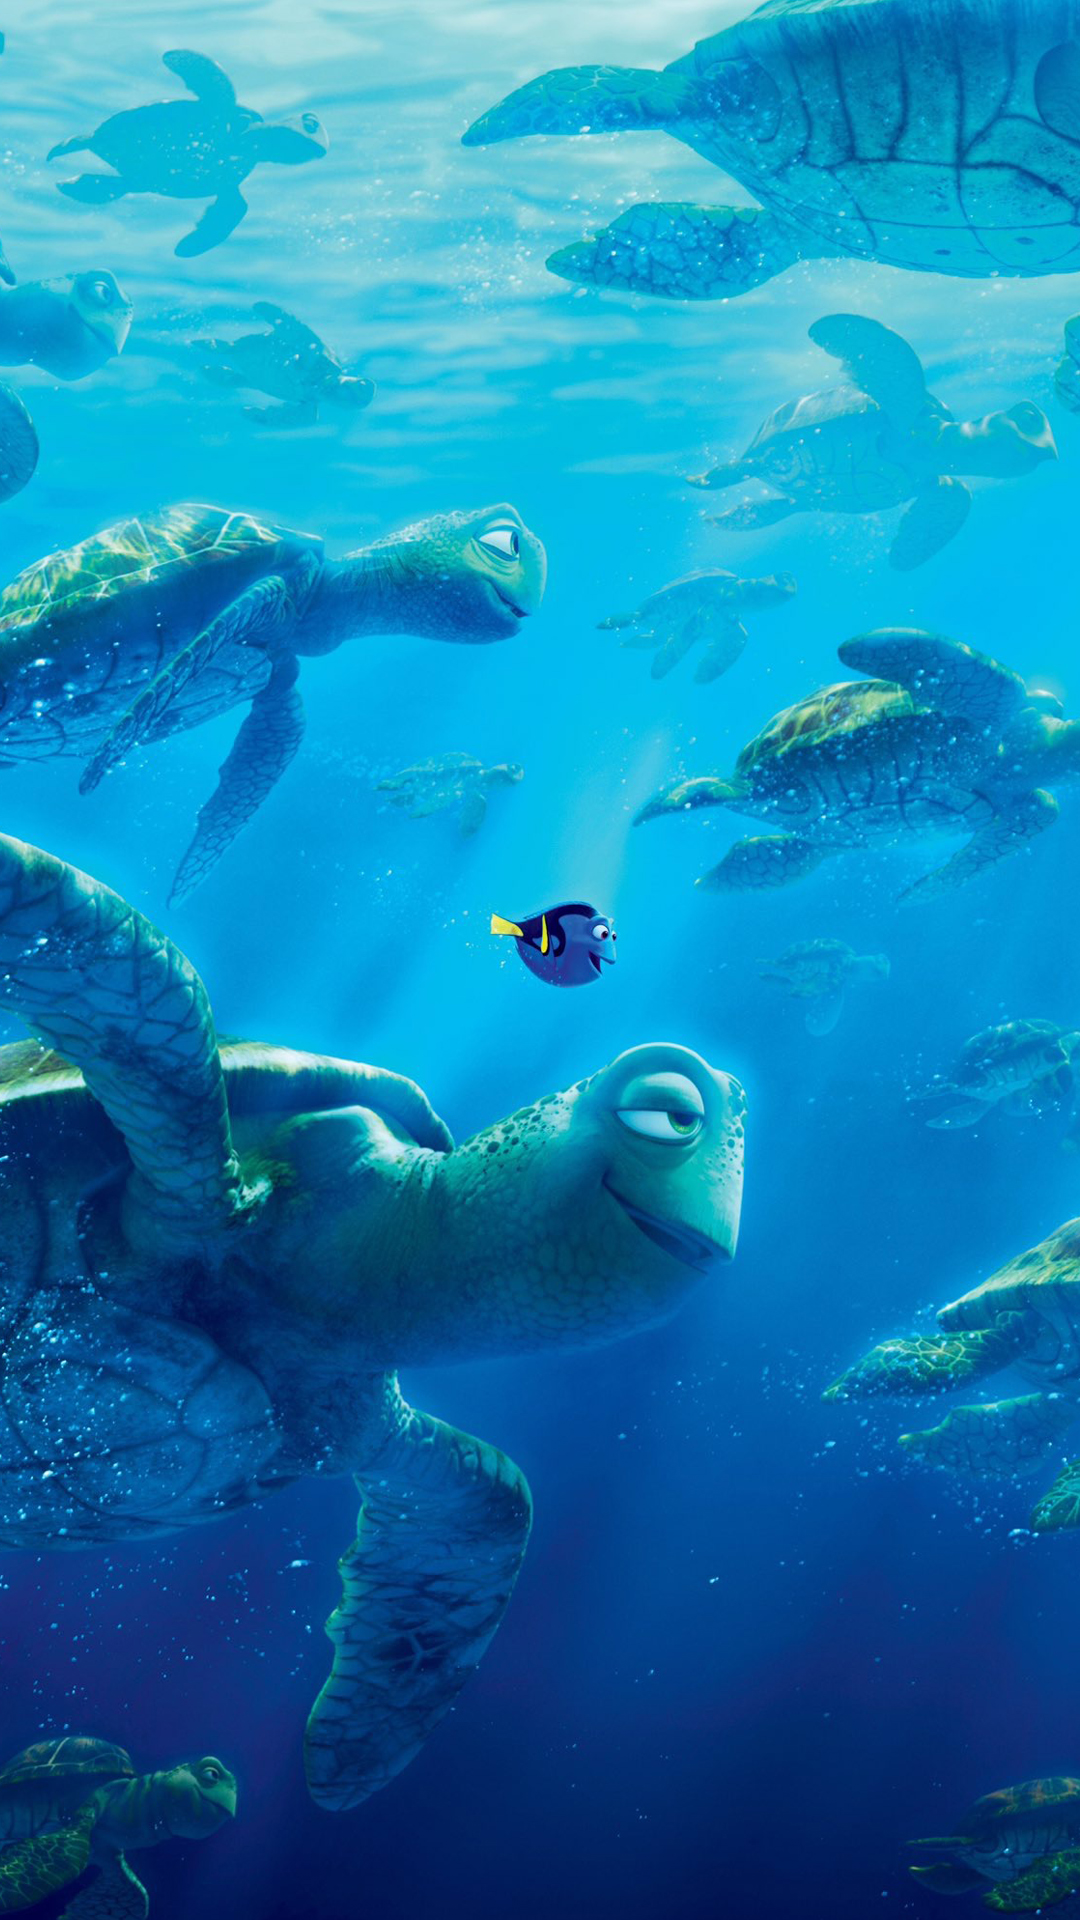 HD wallpaper Movie Finding Dory Bailey Finding Dory Dory Finding Nemo   Wallpaper Flare